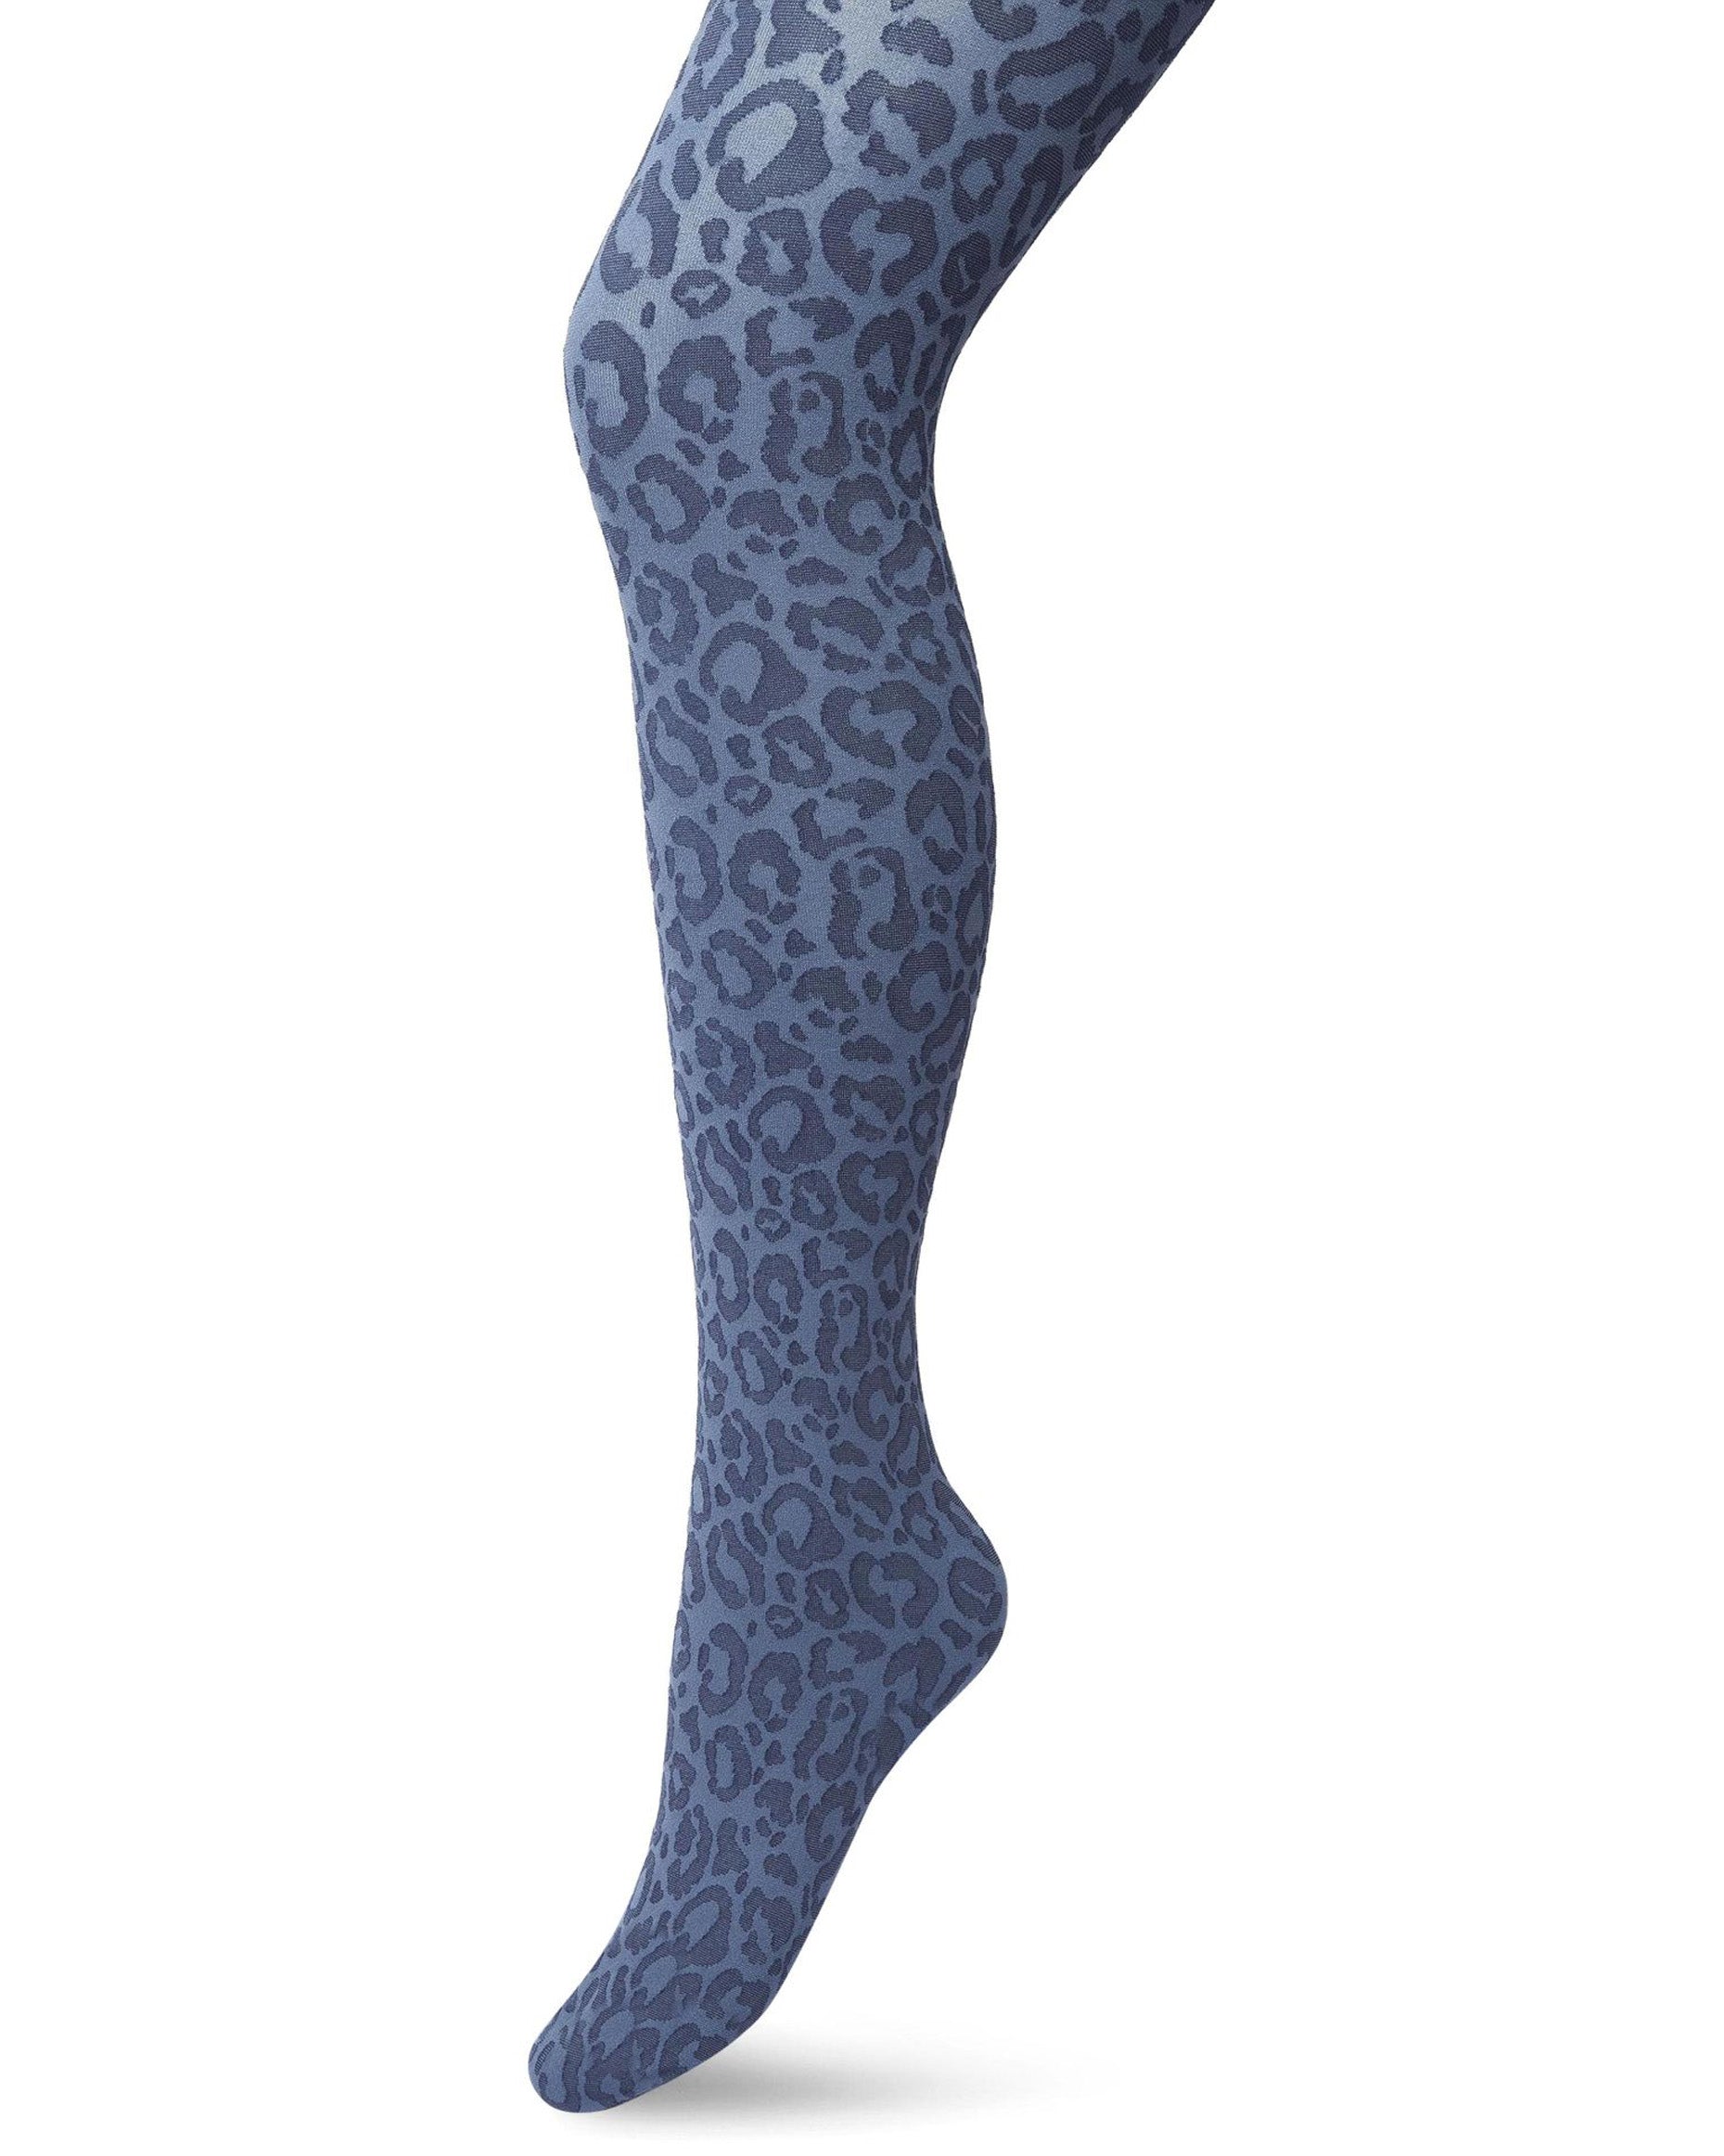 Bonnie Doon - Opaque Panther Tights - Denim blue fashion tights with a woven leopard print style pattern in a darker tone, flat seams, gusset and deep comfort waistband.